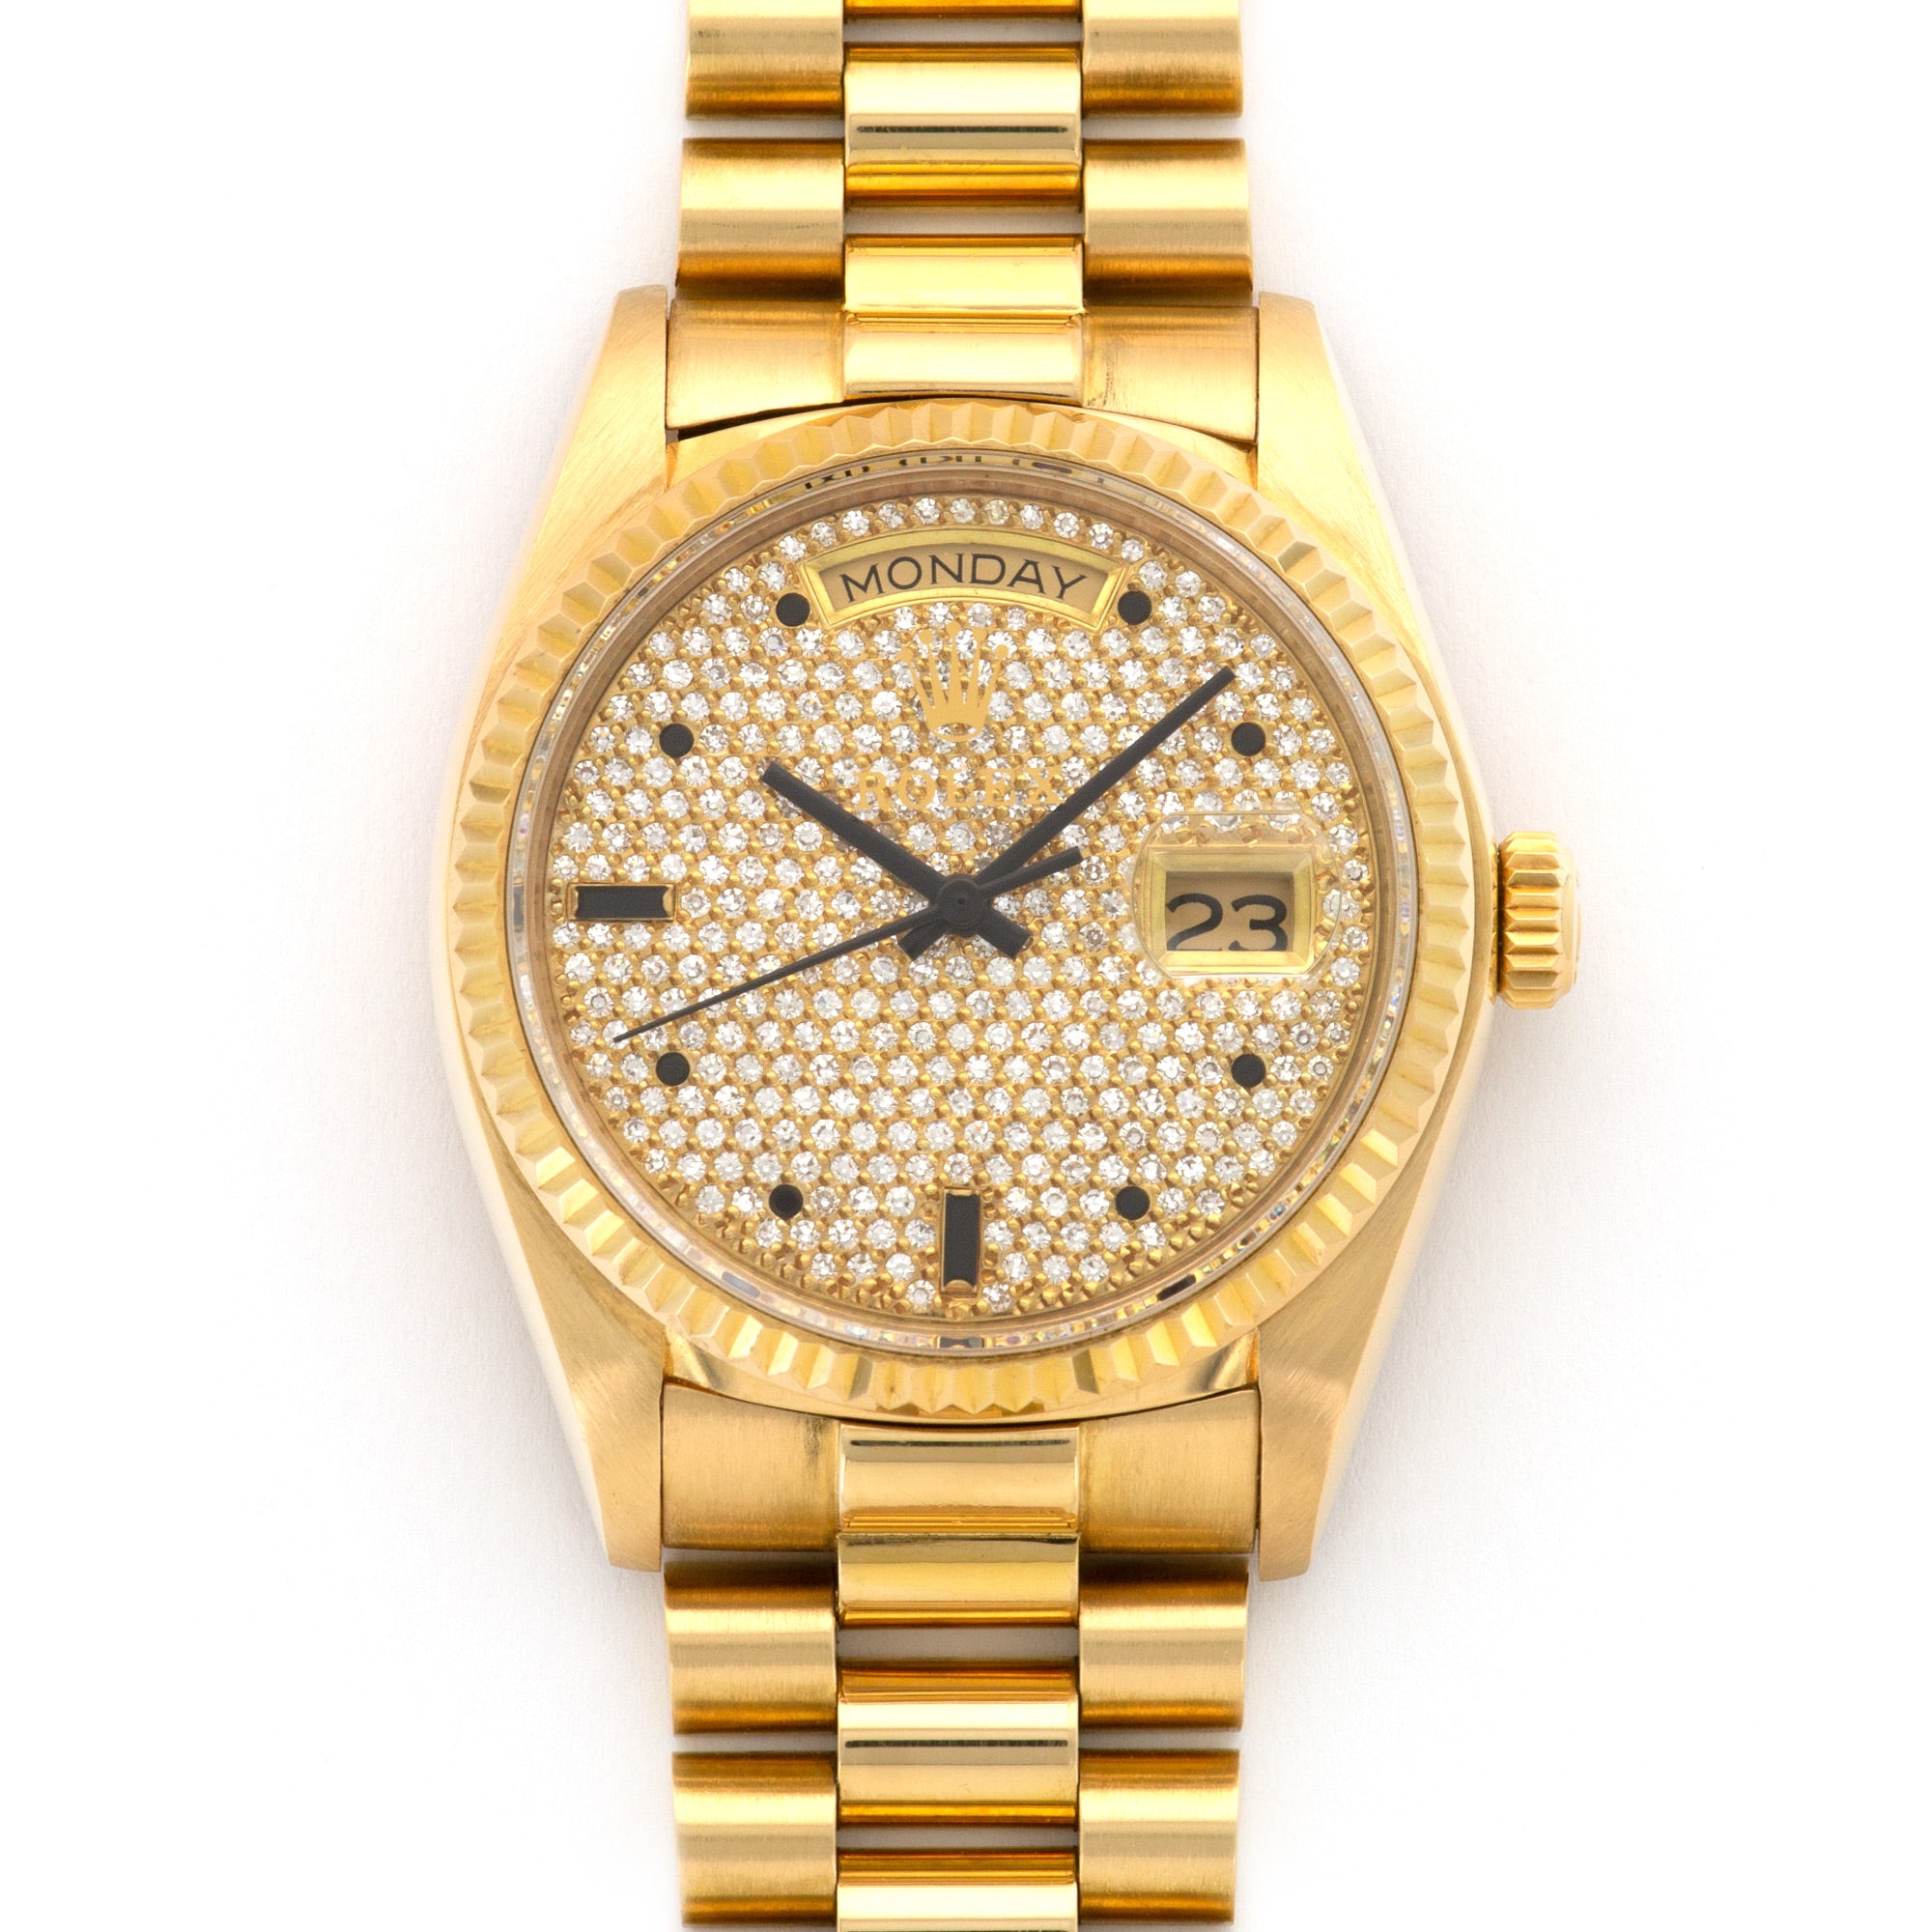 Rolex - Rolex Yellow Gold Day-Date Pave Diamond Watch, from 1981 - The Keystone Watches